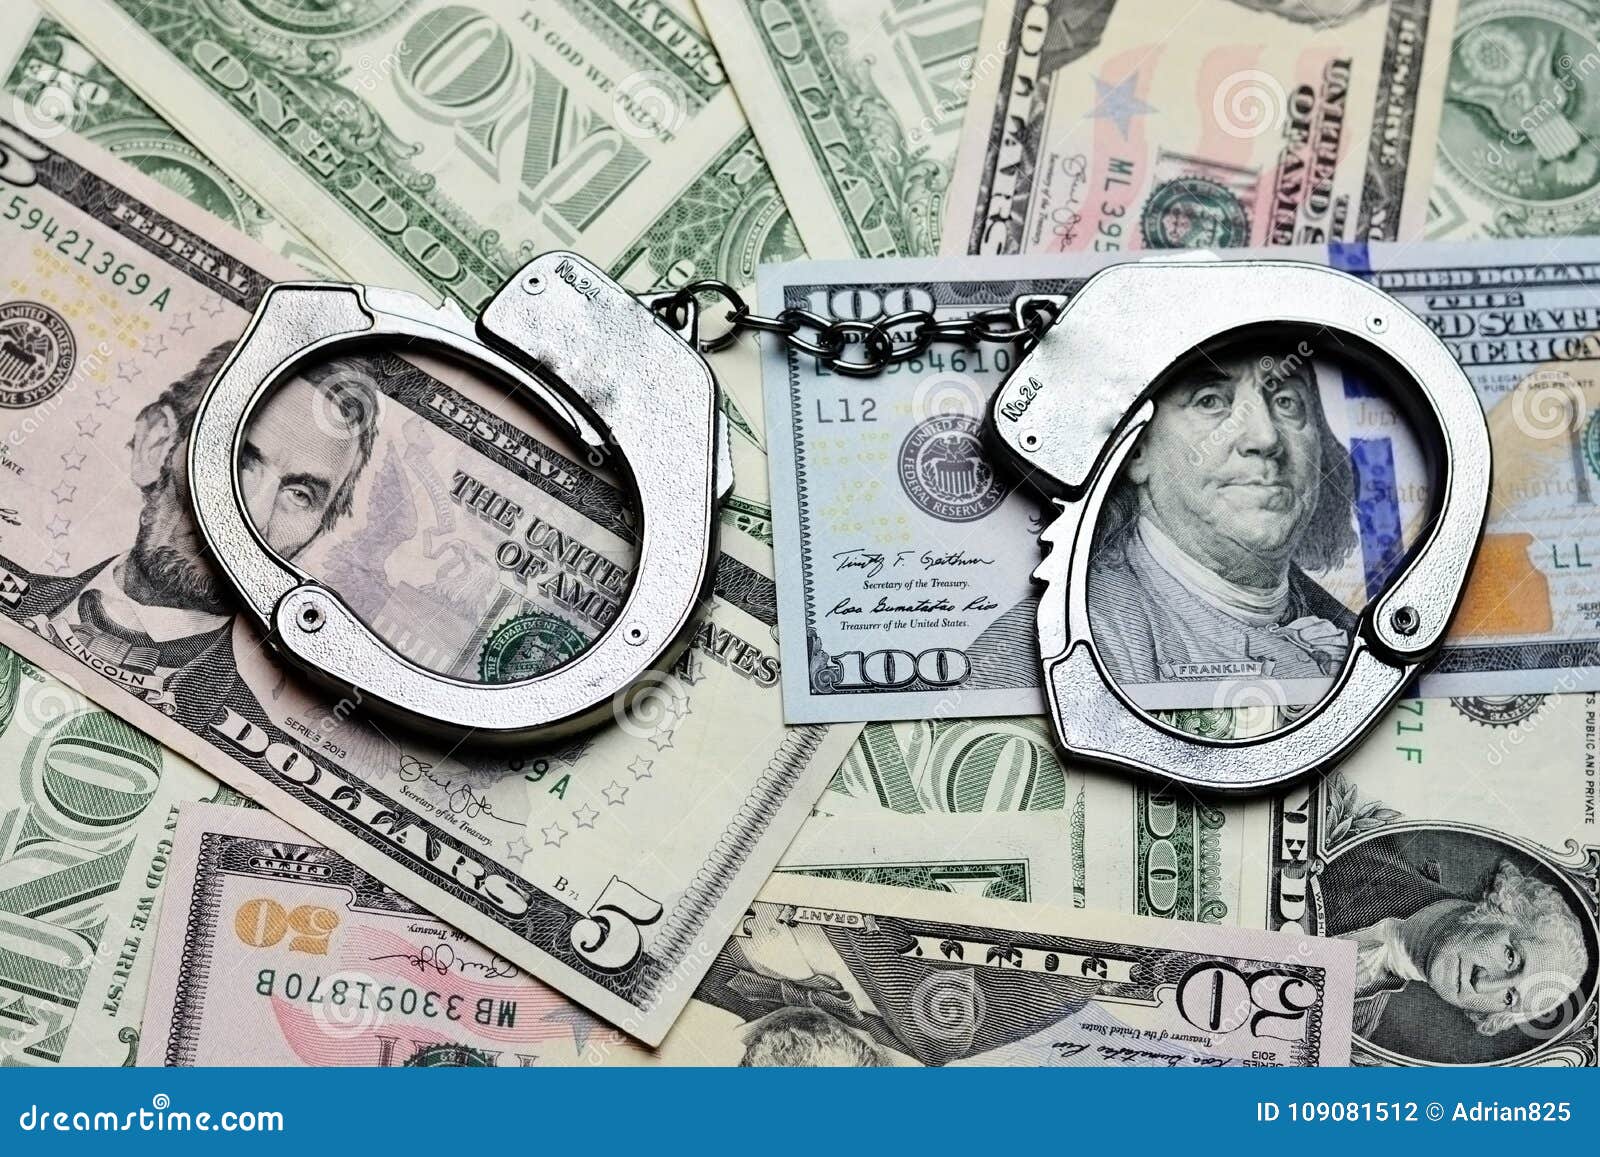 steel handcuffs above us dollar banknotes, tax evasion concept